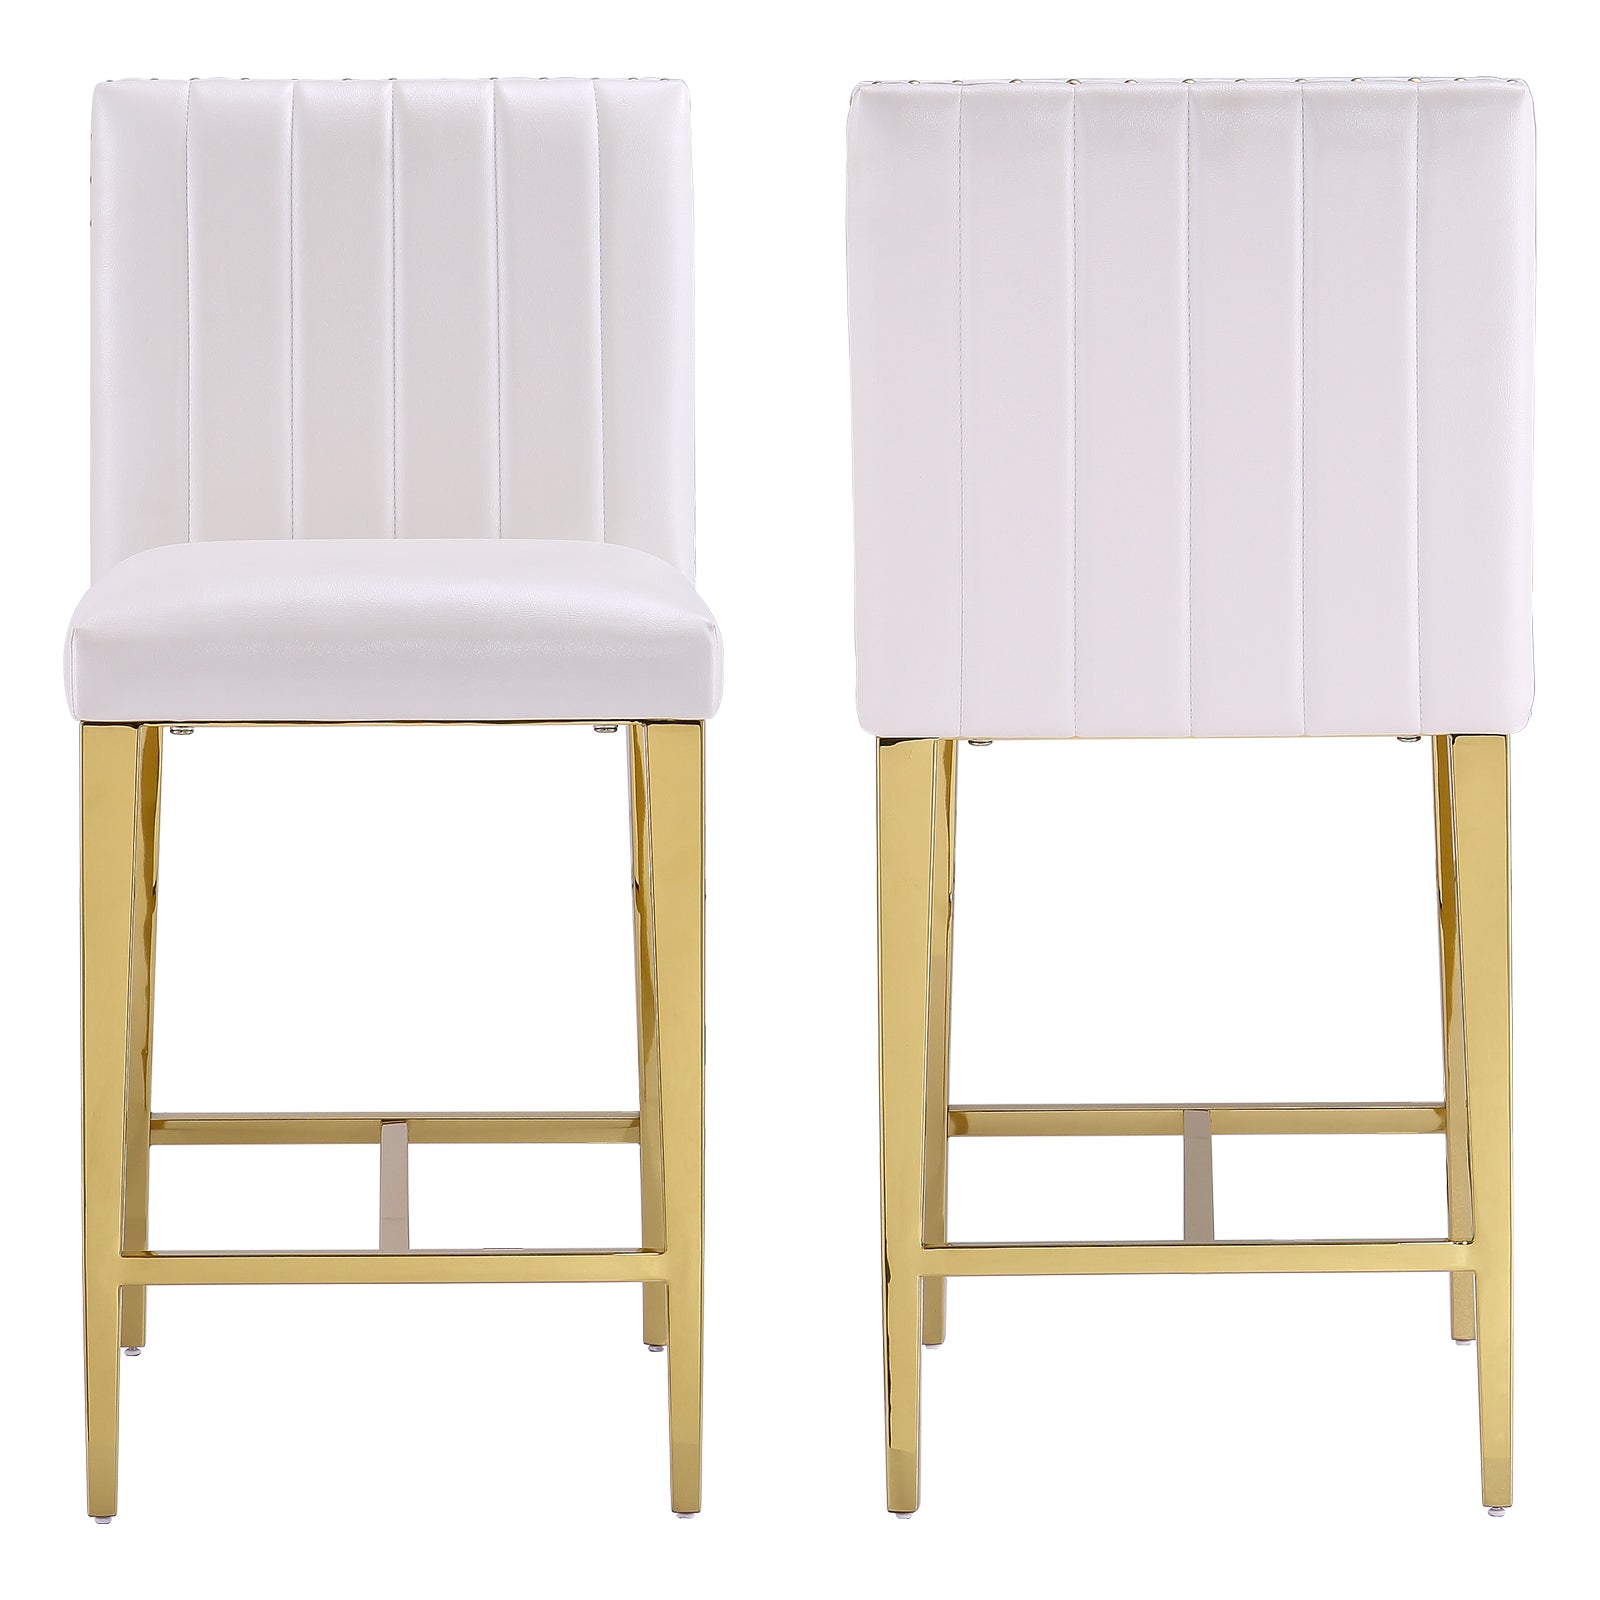 Counter Height Bar Stools | White Faux Leather | 24.8-Inch Height